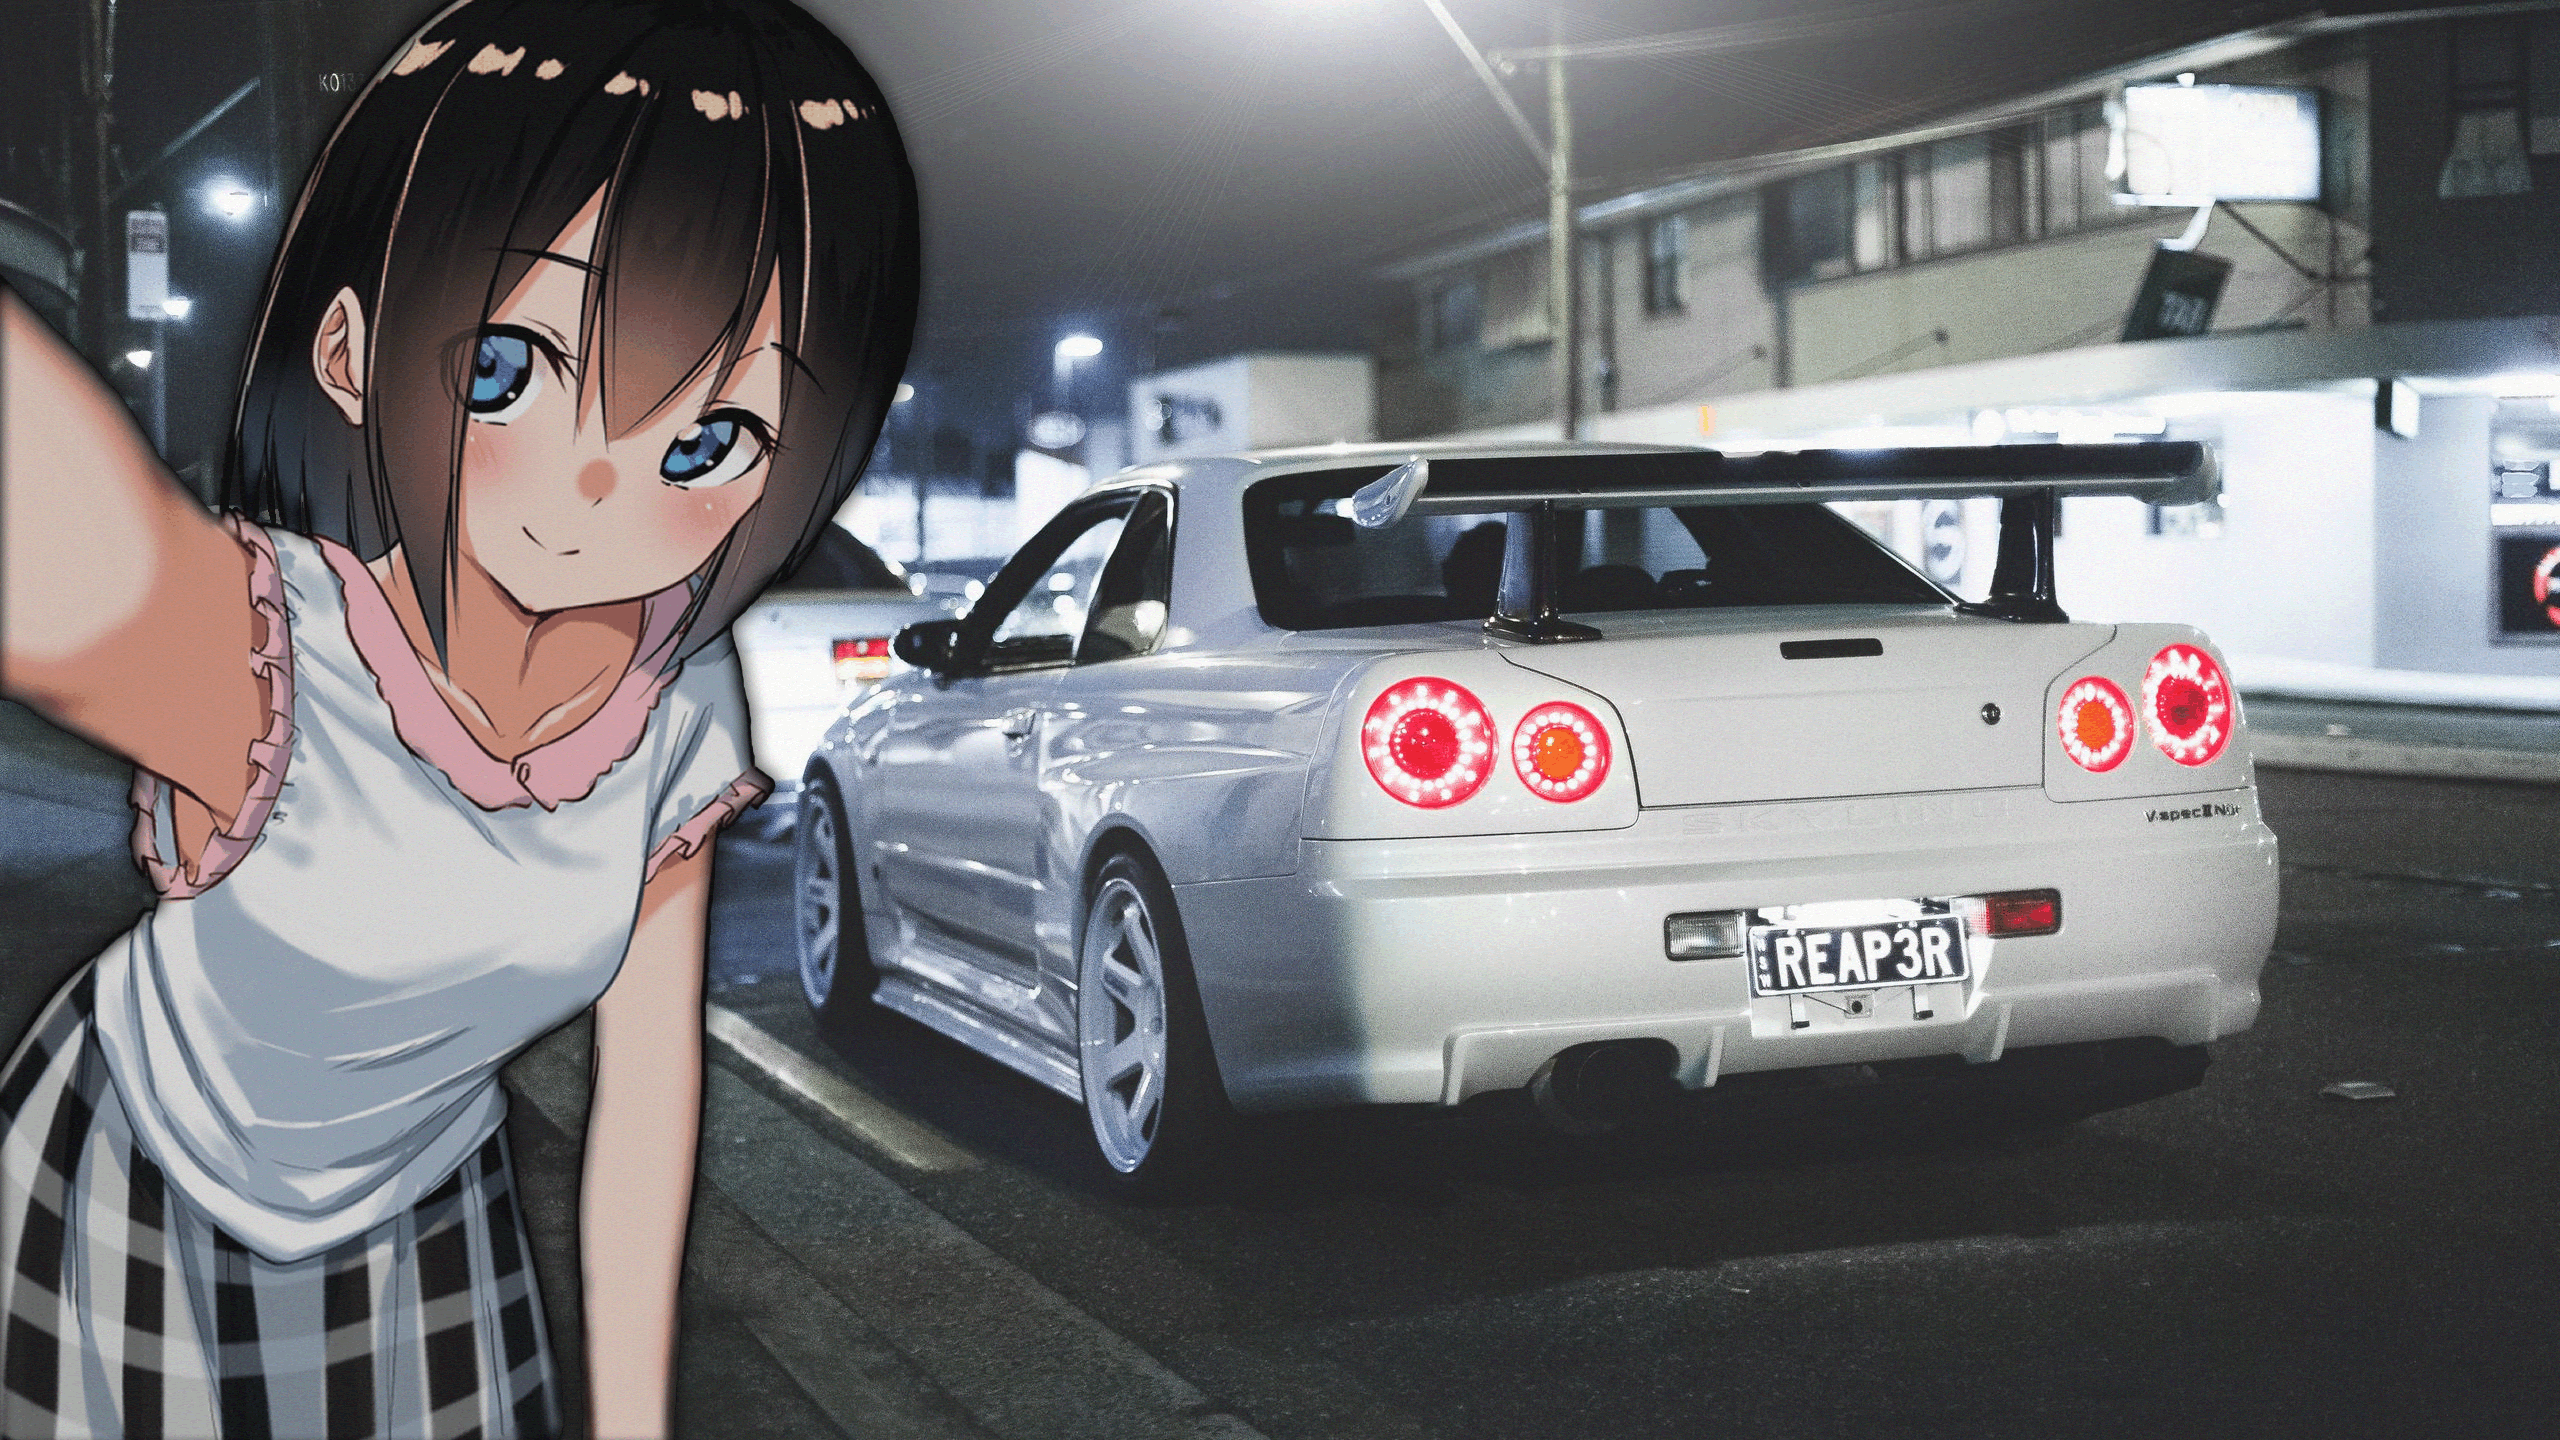 6+ Anime Car Wallpapers for iPhone and Android by Arthur Thomas